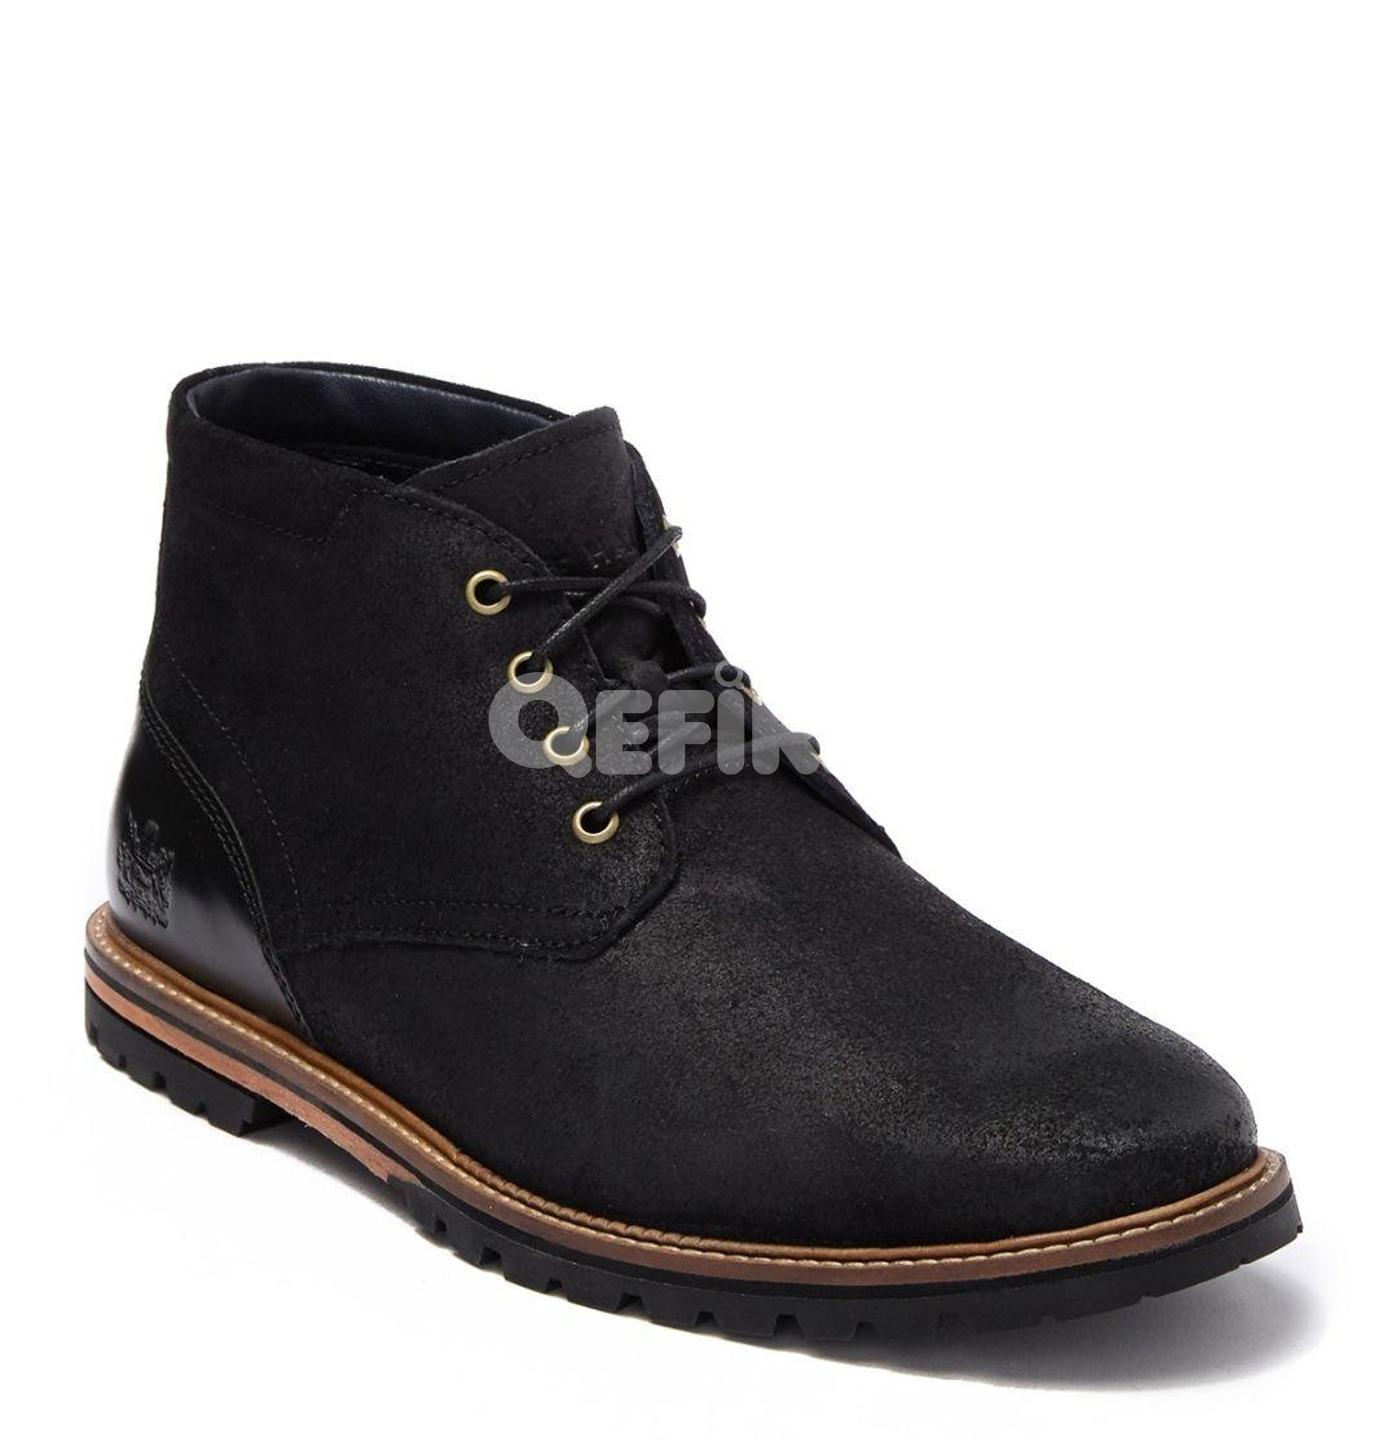 Original Cole Haan Men's Boots in Addis Ababa | Qefira